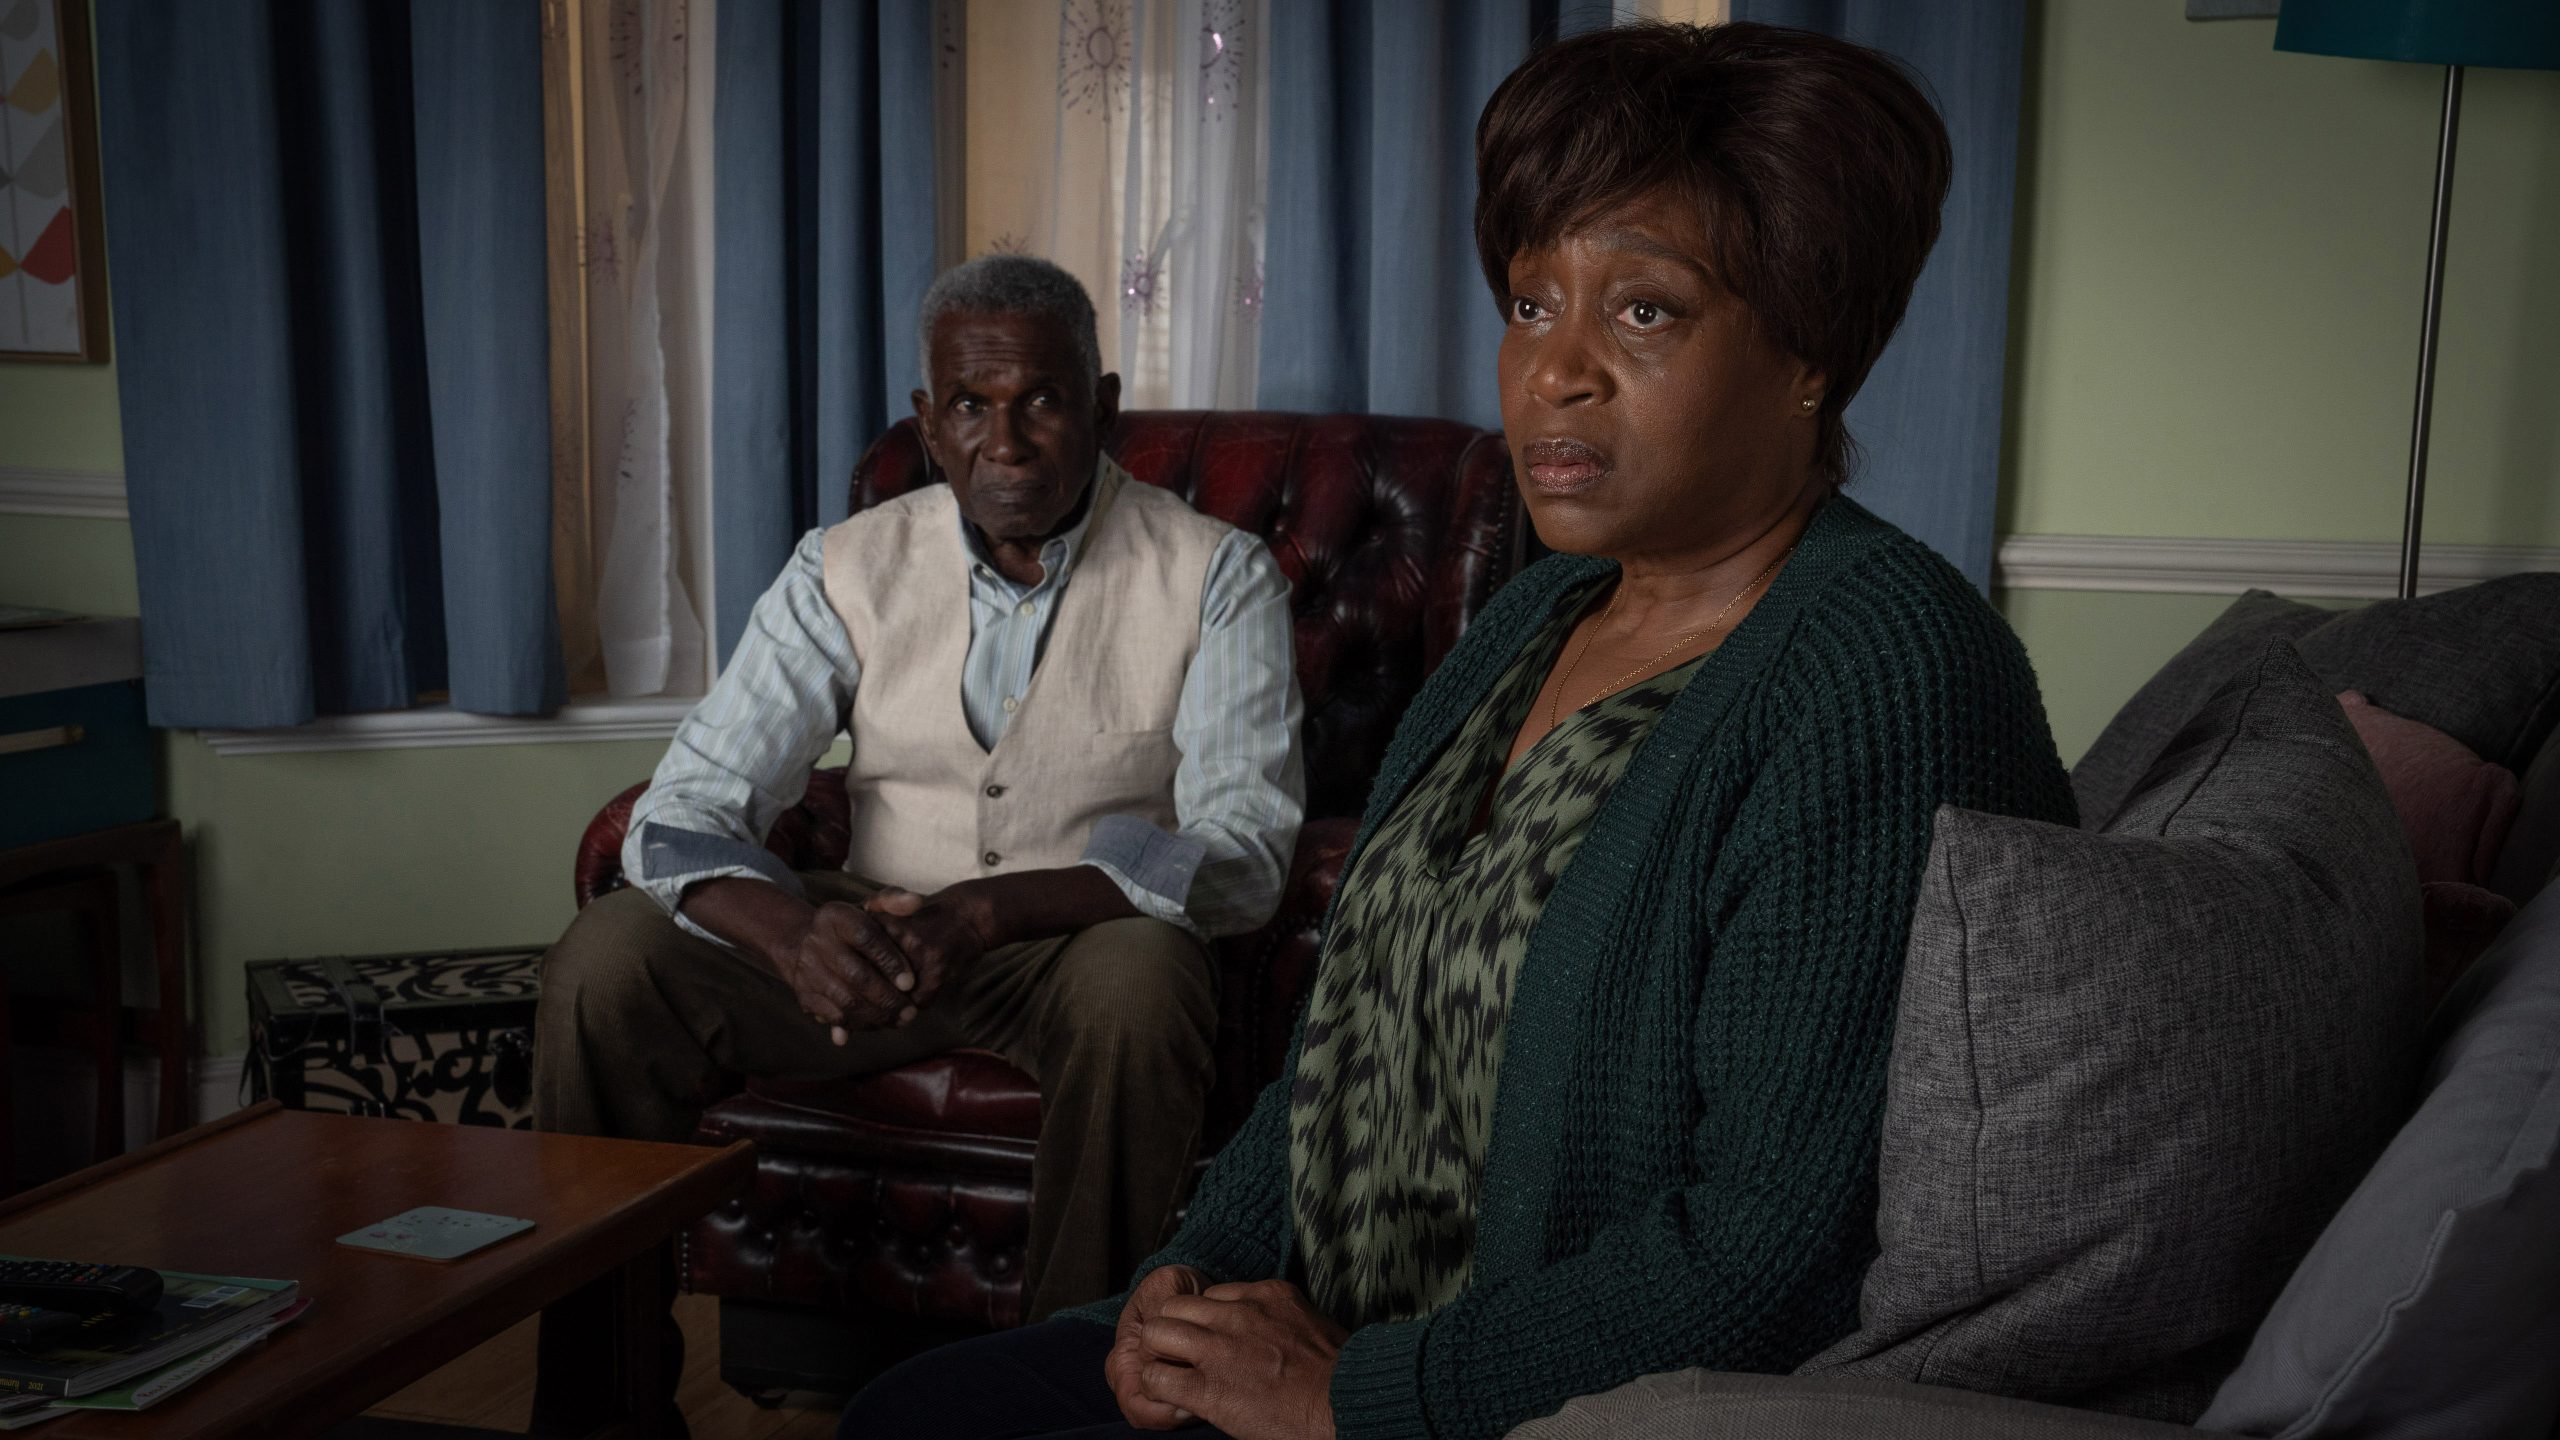 Patrick Trueman devastated as he discovers the truth about what happened to Yolande in EastEnders